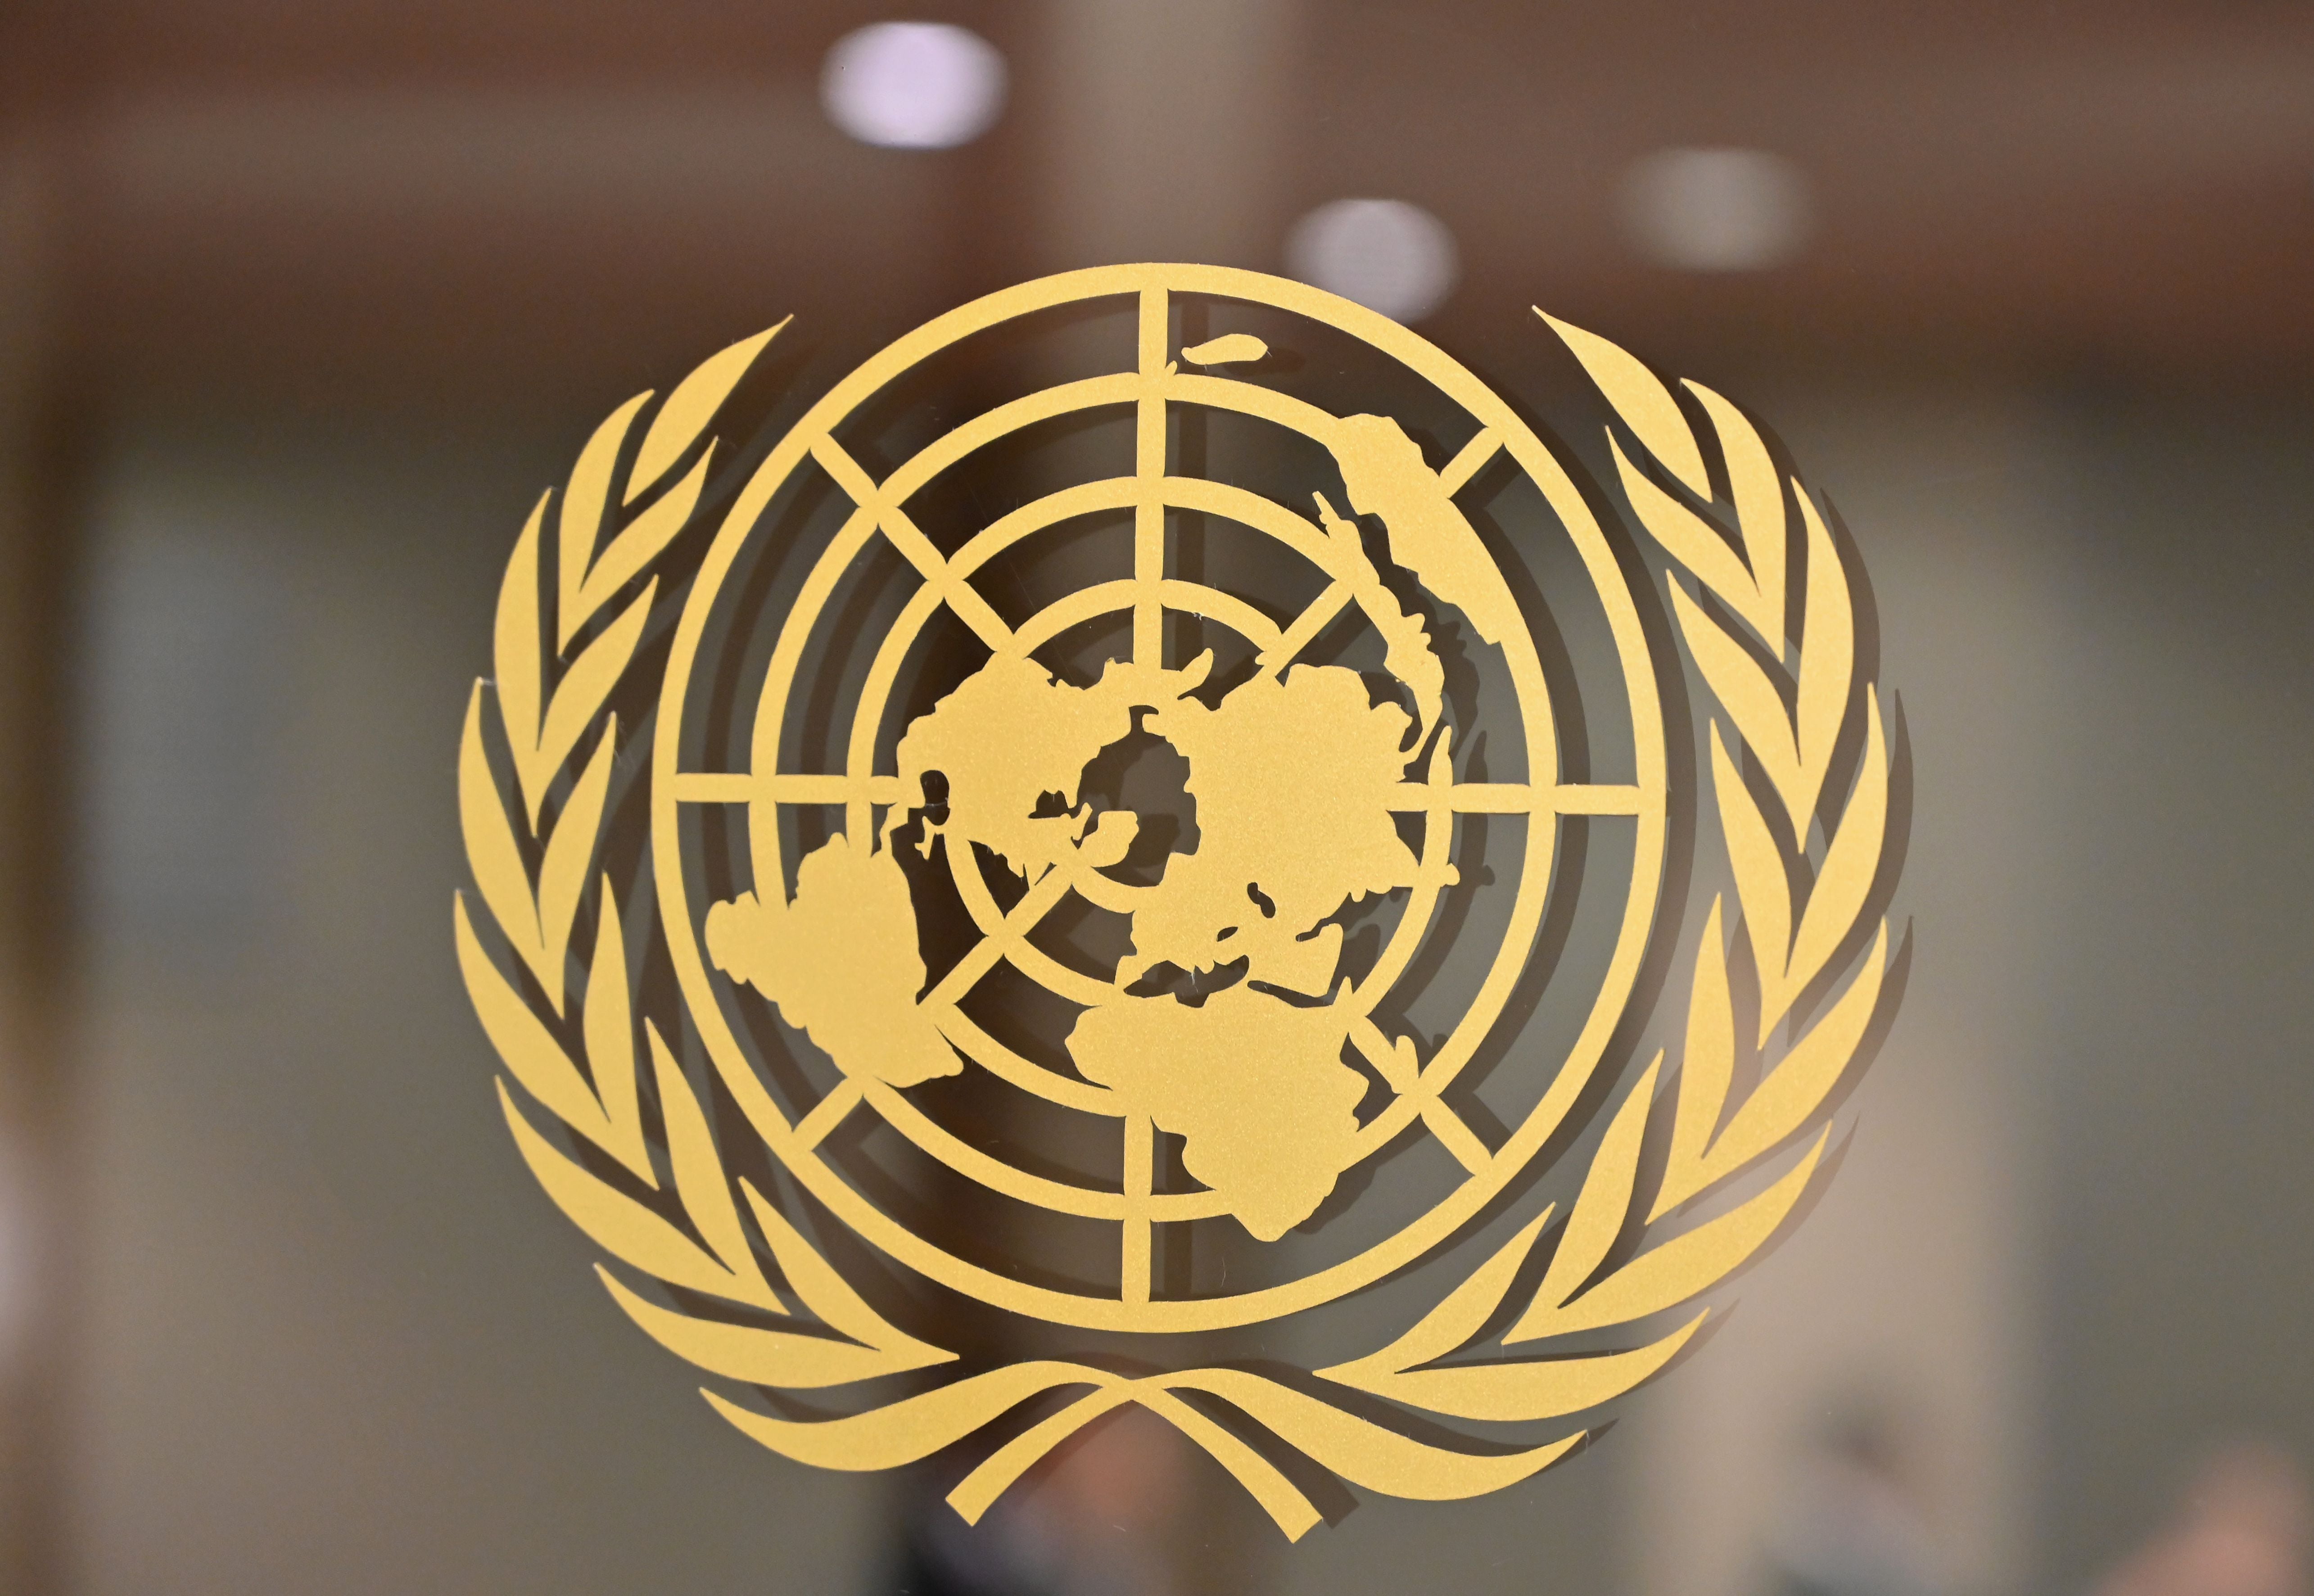 UN logo seen at its Headquarters in New York on 24 September, 2019